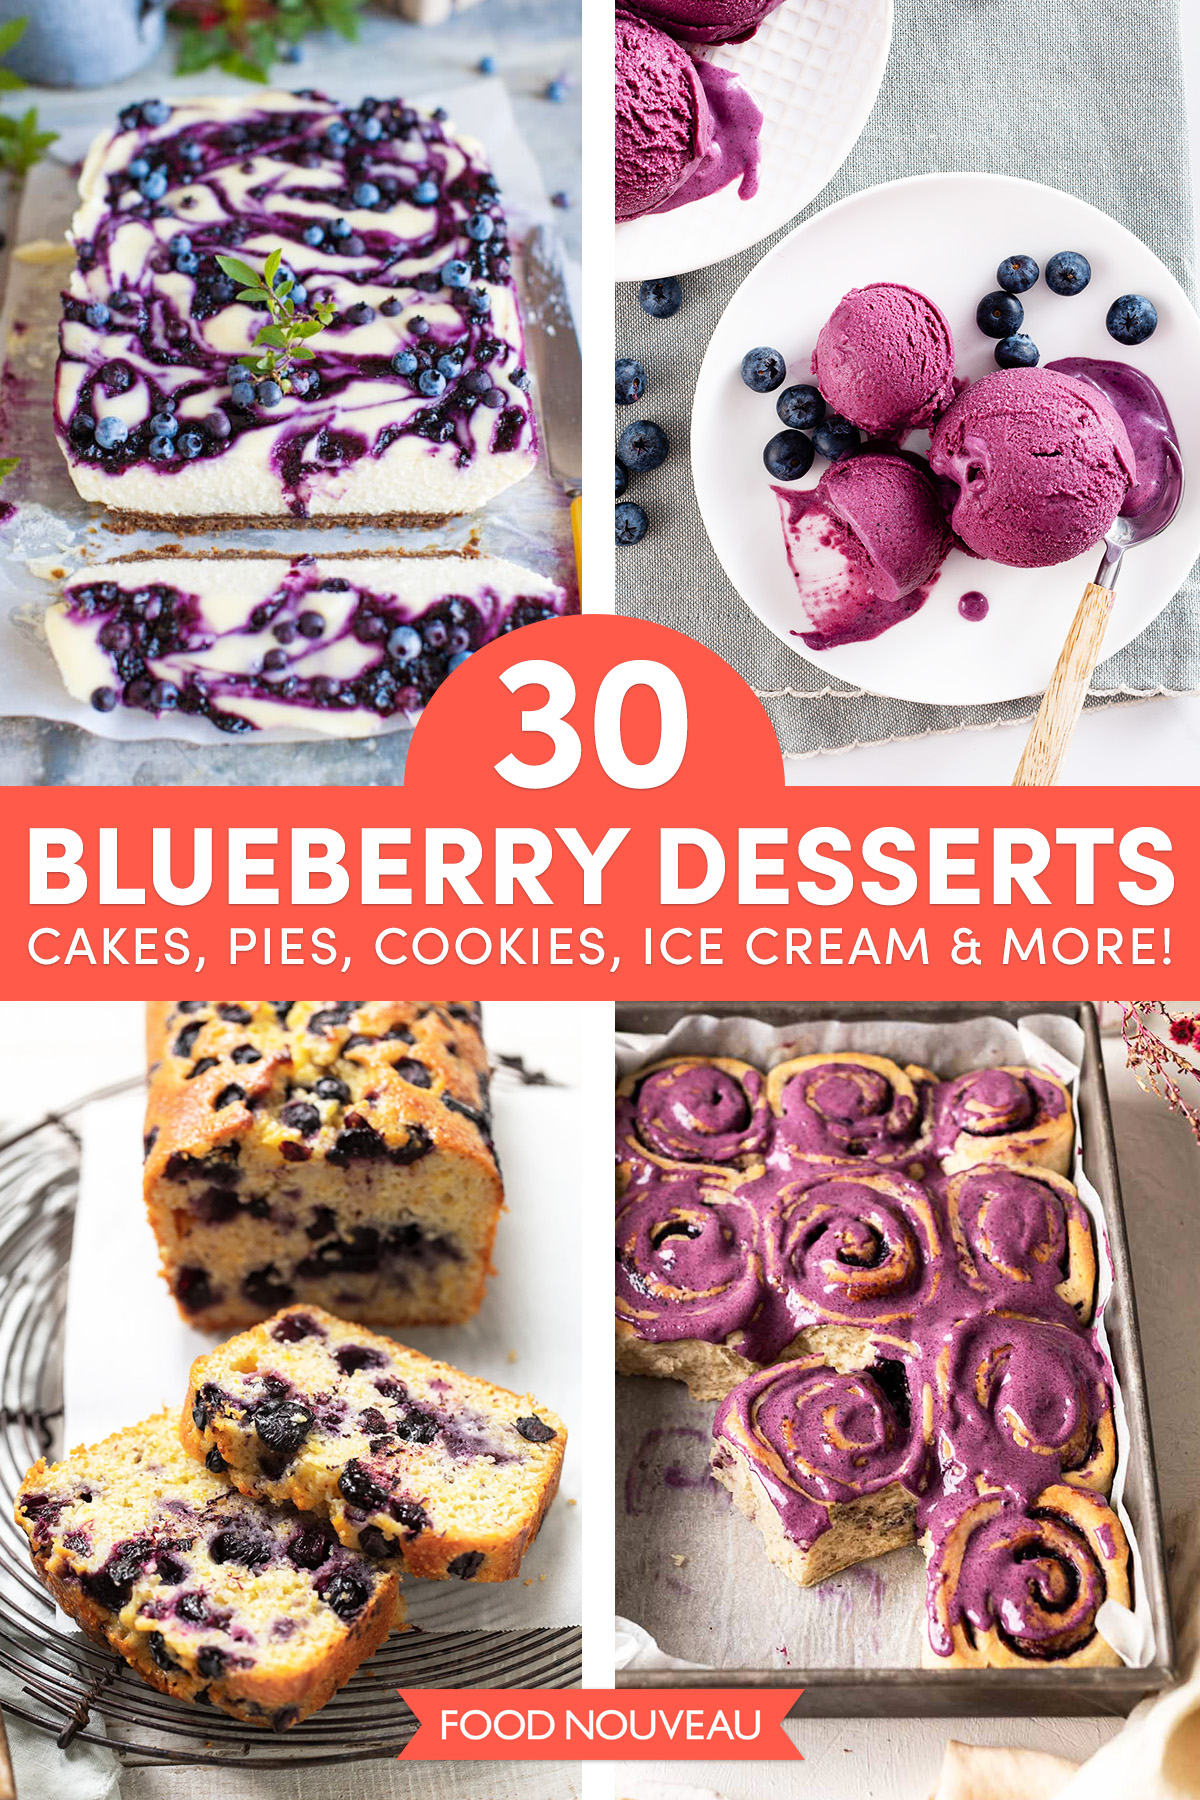 30 Luscious Blueberry Dessert Recipes That Will Get Everyone Talking // FoodNouveau.com